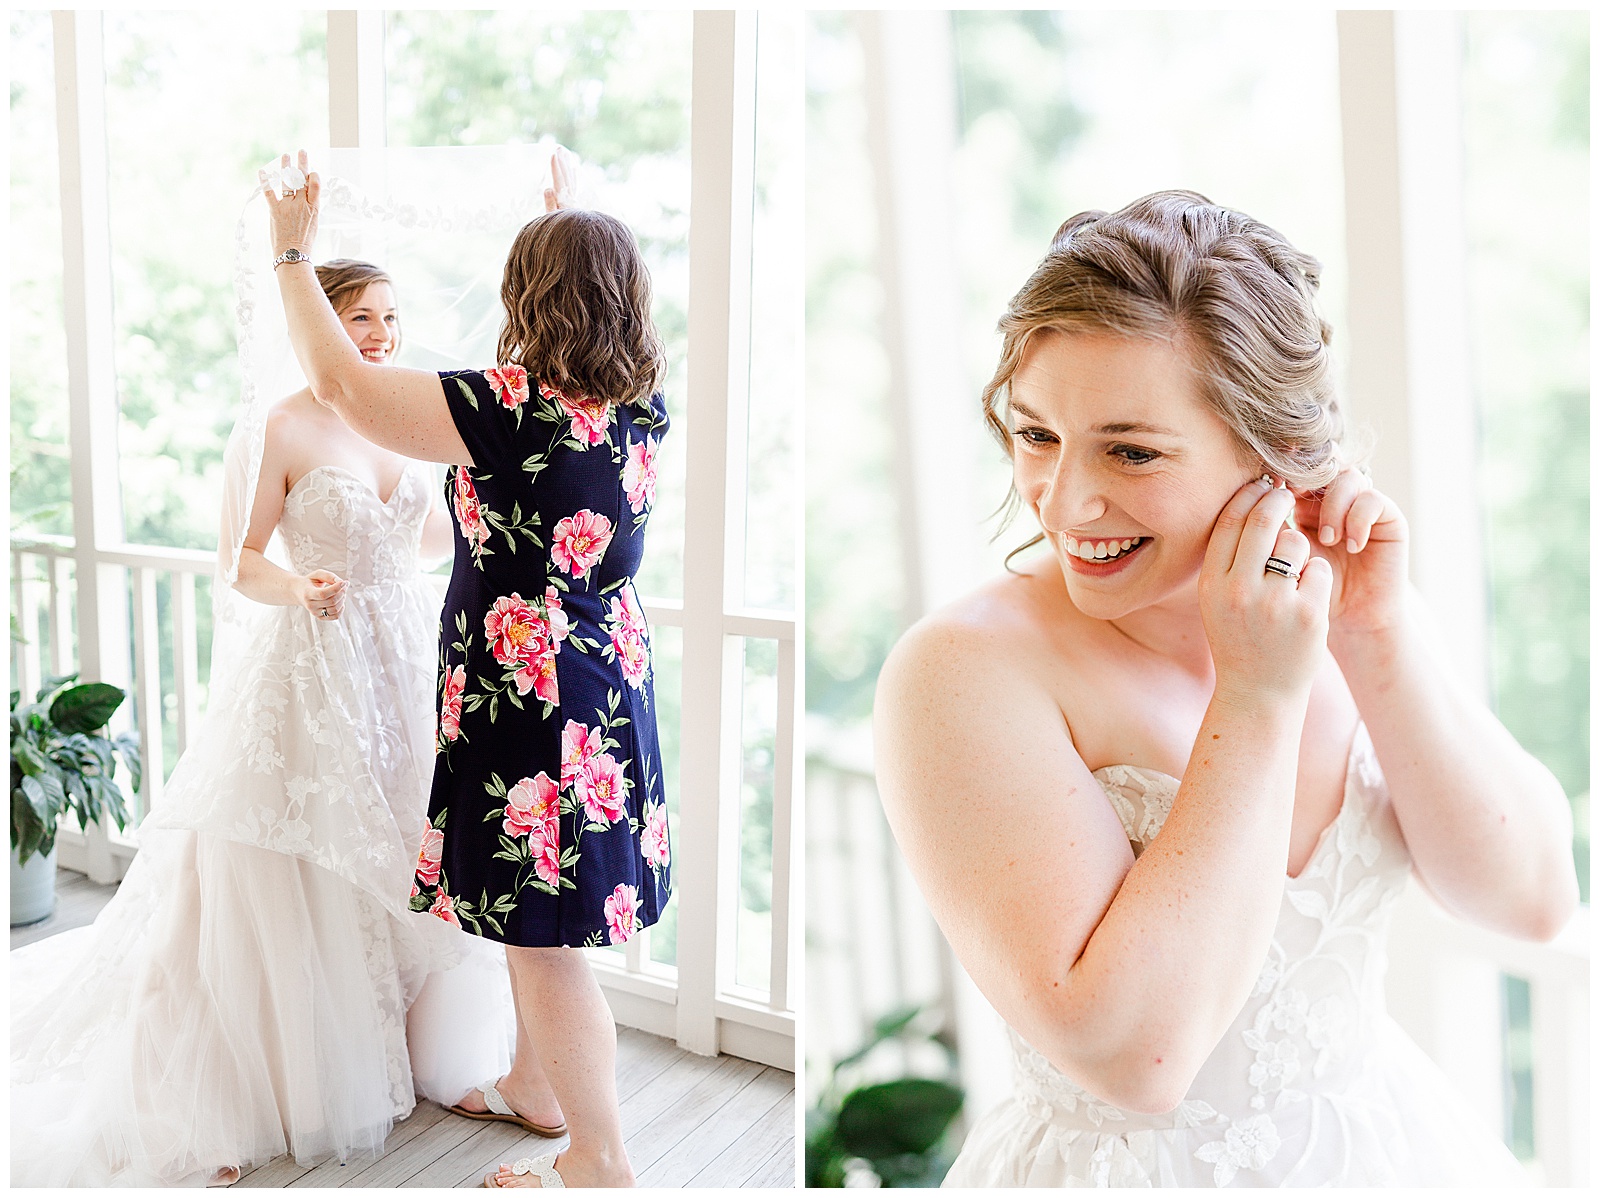 Beautiful Strapless Lace Wedding Dress from Outdoorsy Summer Wedding at North Carolina Lakehouse in the Mountains | check out the full wedding at KevynDixonPhoto.com